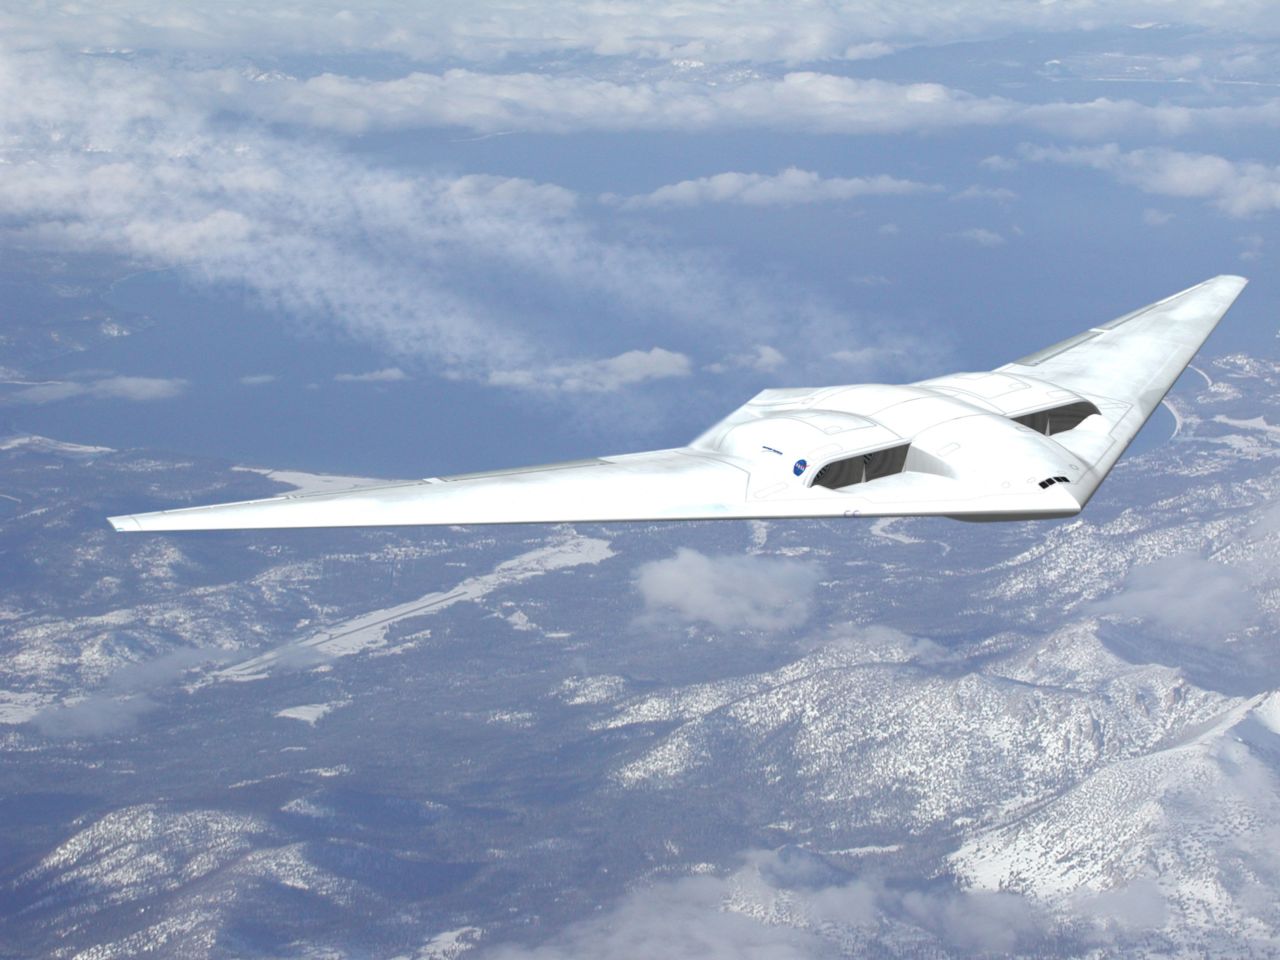 Northrup Grumman's previous experience with military "flying wing" designs led to this concept which NASA describes as extremely aerodynamic.